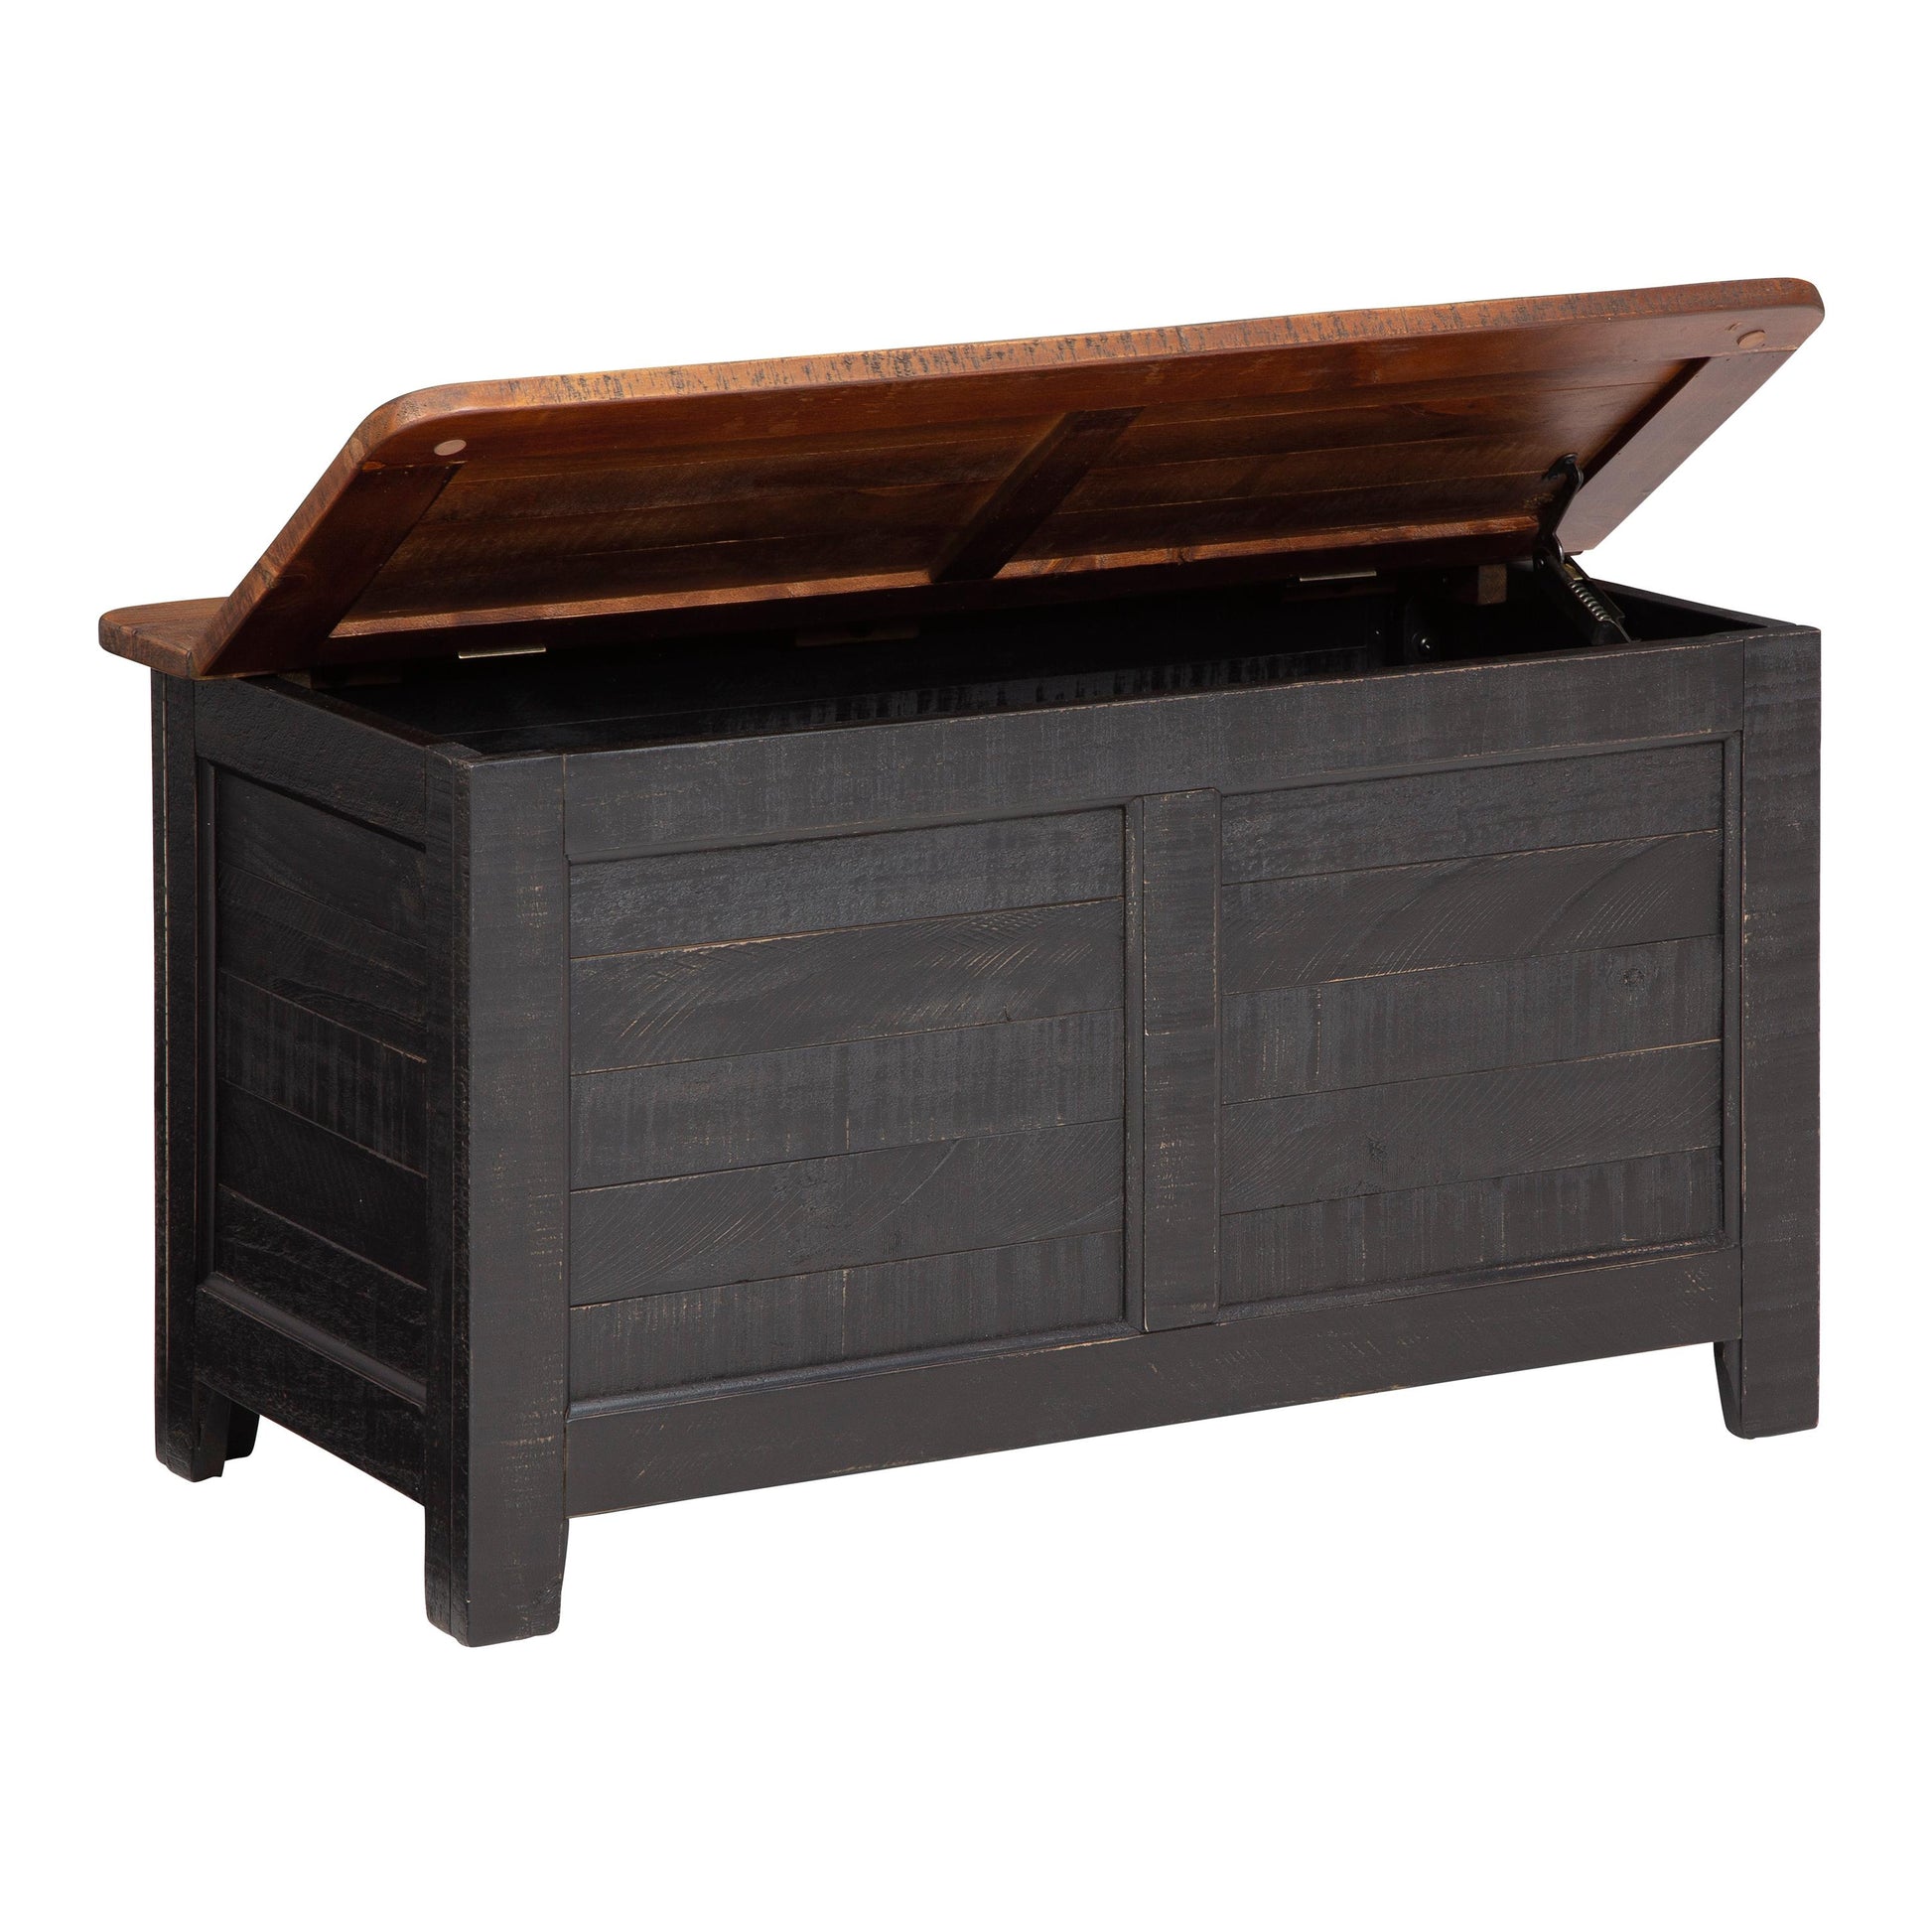 Signature Design by Ashley Home Decor Chests A4000320 IMAGE 2